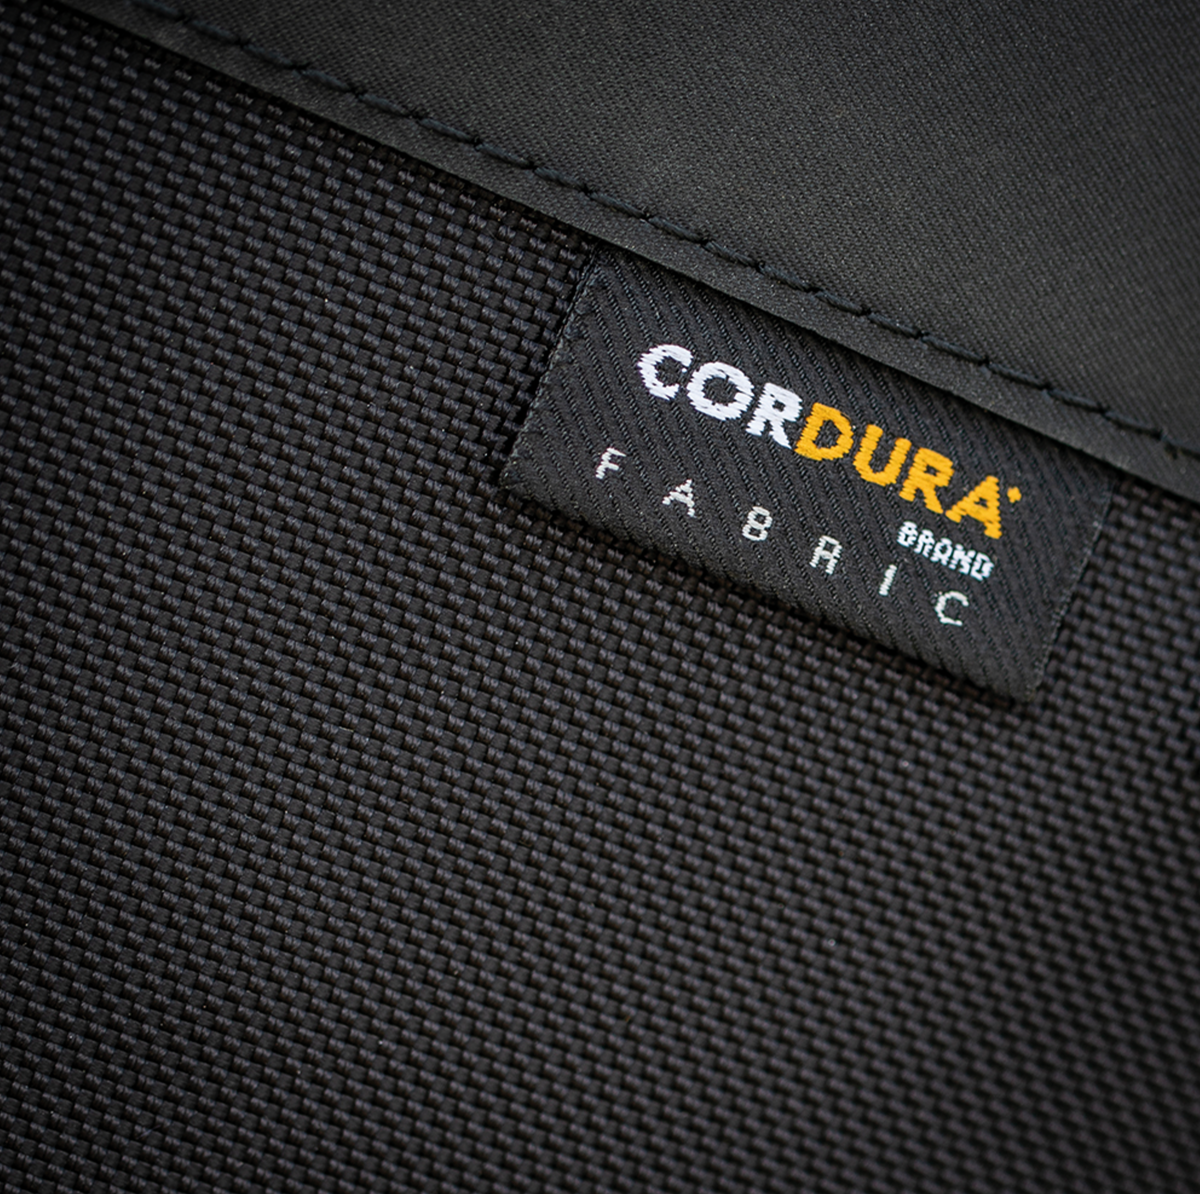 All about Cordura